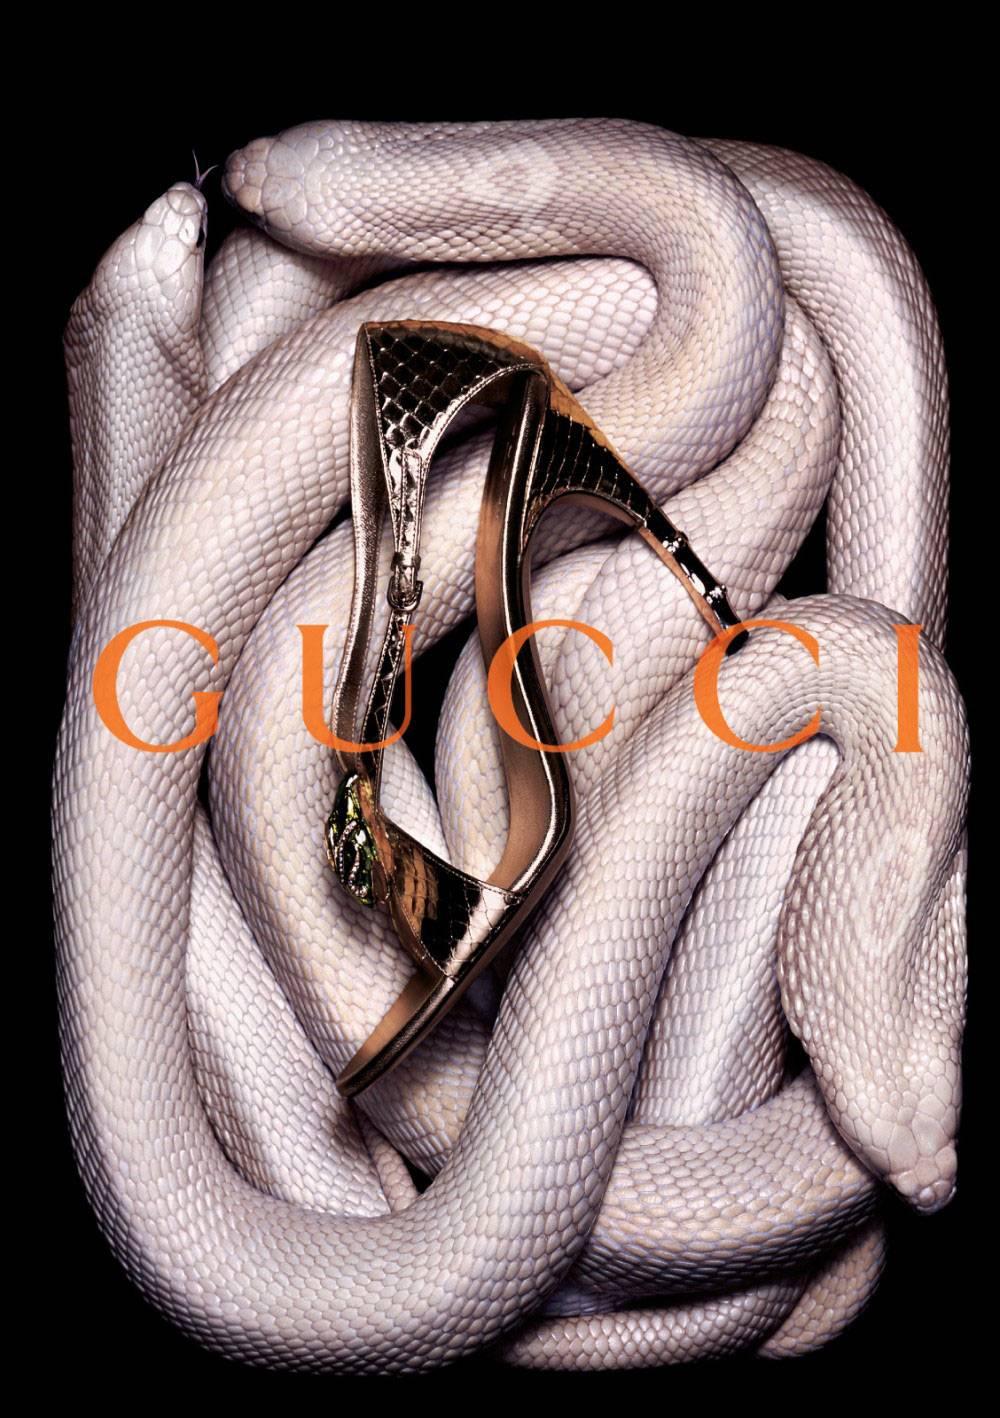 Tom Ford For Gucci Heels
Worn Once for a Runway show
Uppers are perfect, Soles have very minimal wear
* Stunning in Gold Python
* Tom Ford's 